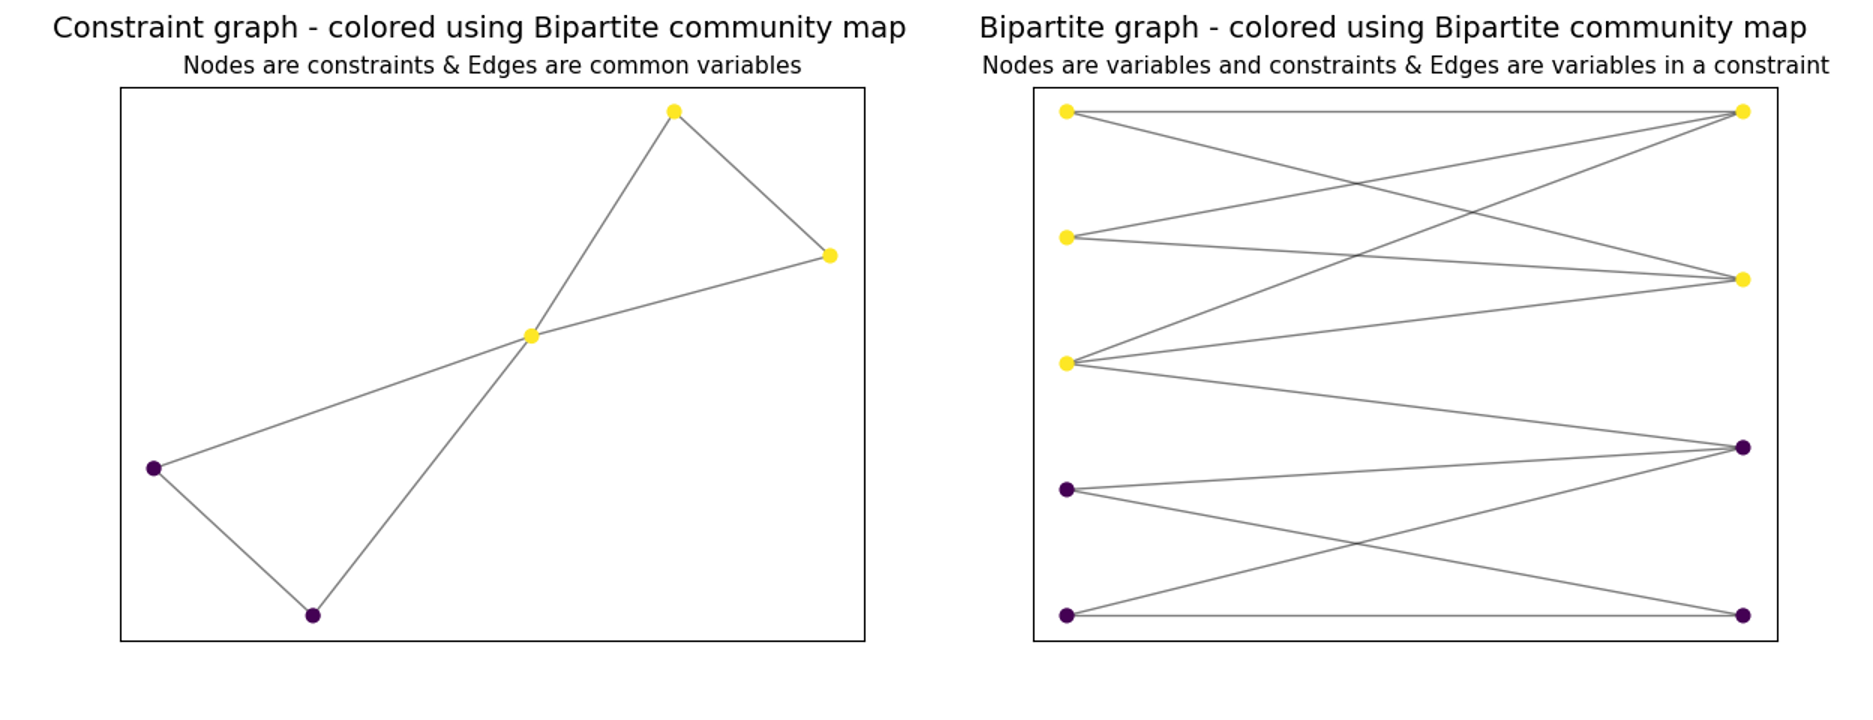 Graphical representation of the communities in the model 'decode_model_1' for two different types of graphs